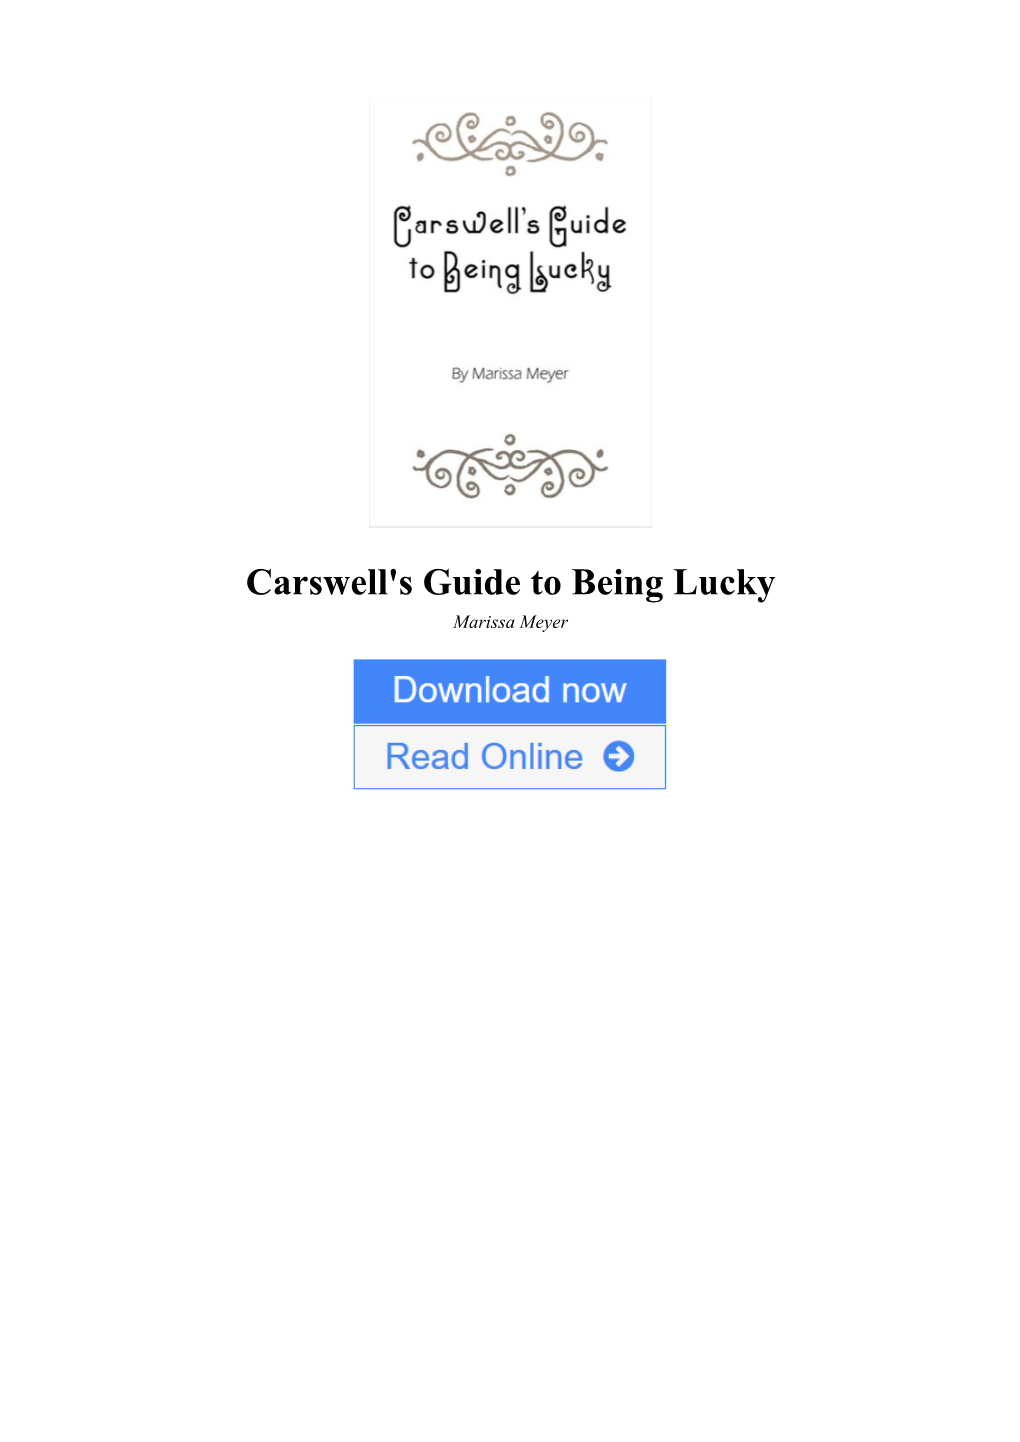 Carswell's Guide to Being Lucky by Marissa Meyer